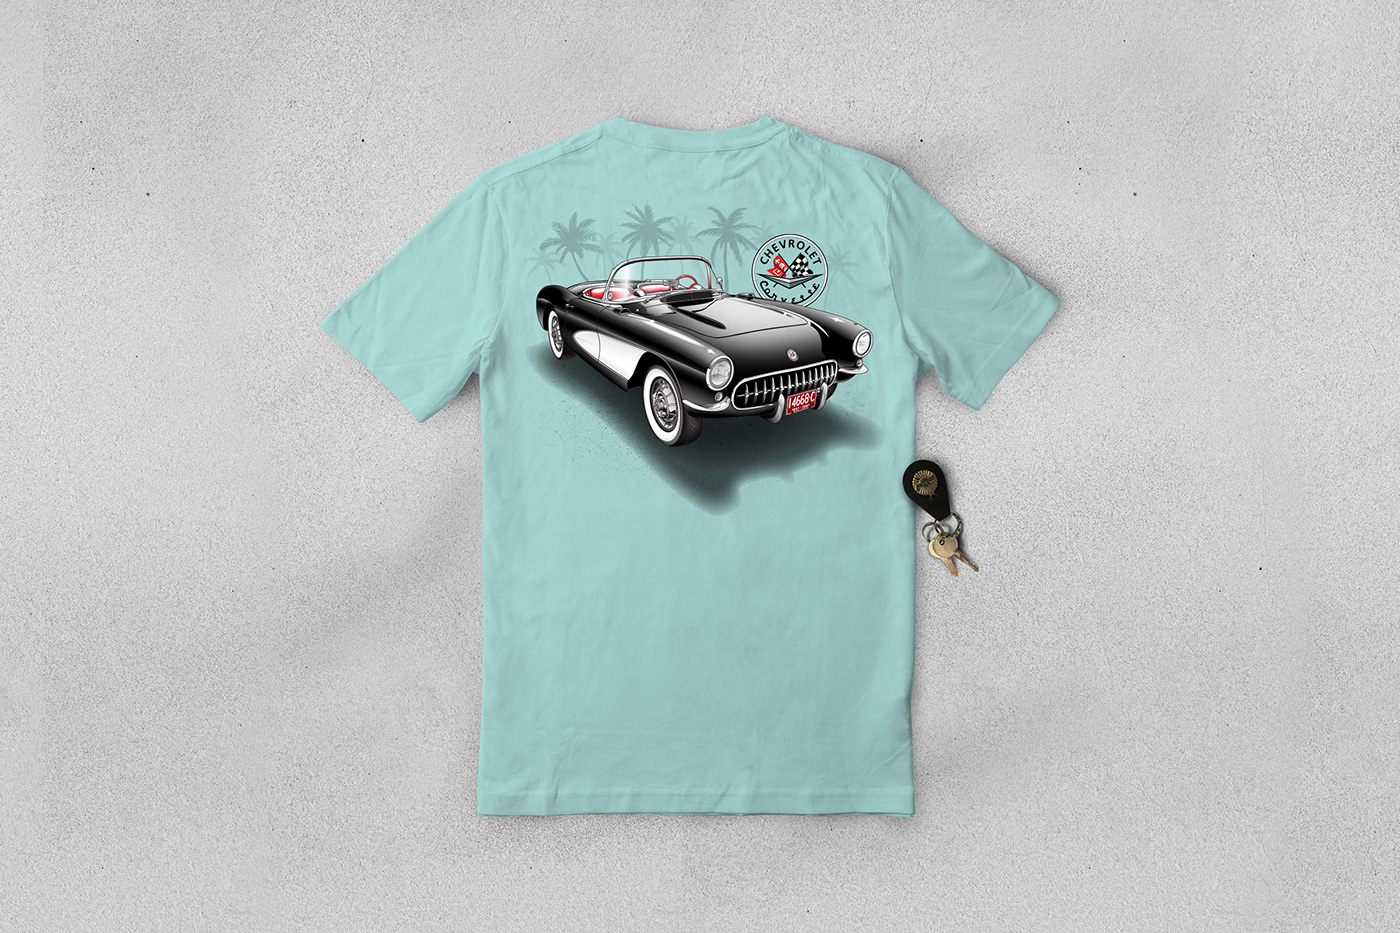 T-shirt with a 67' Corvette Stingray design laying on a sandy beach with car keys